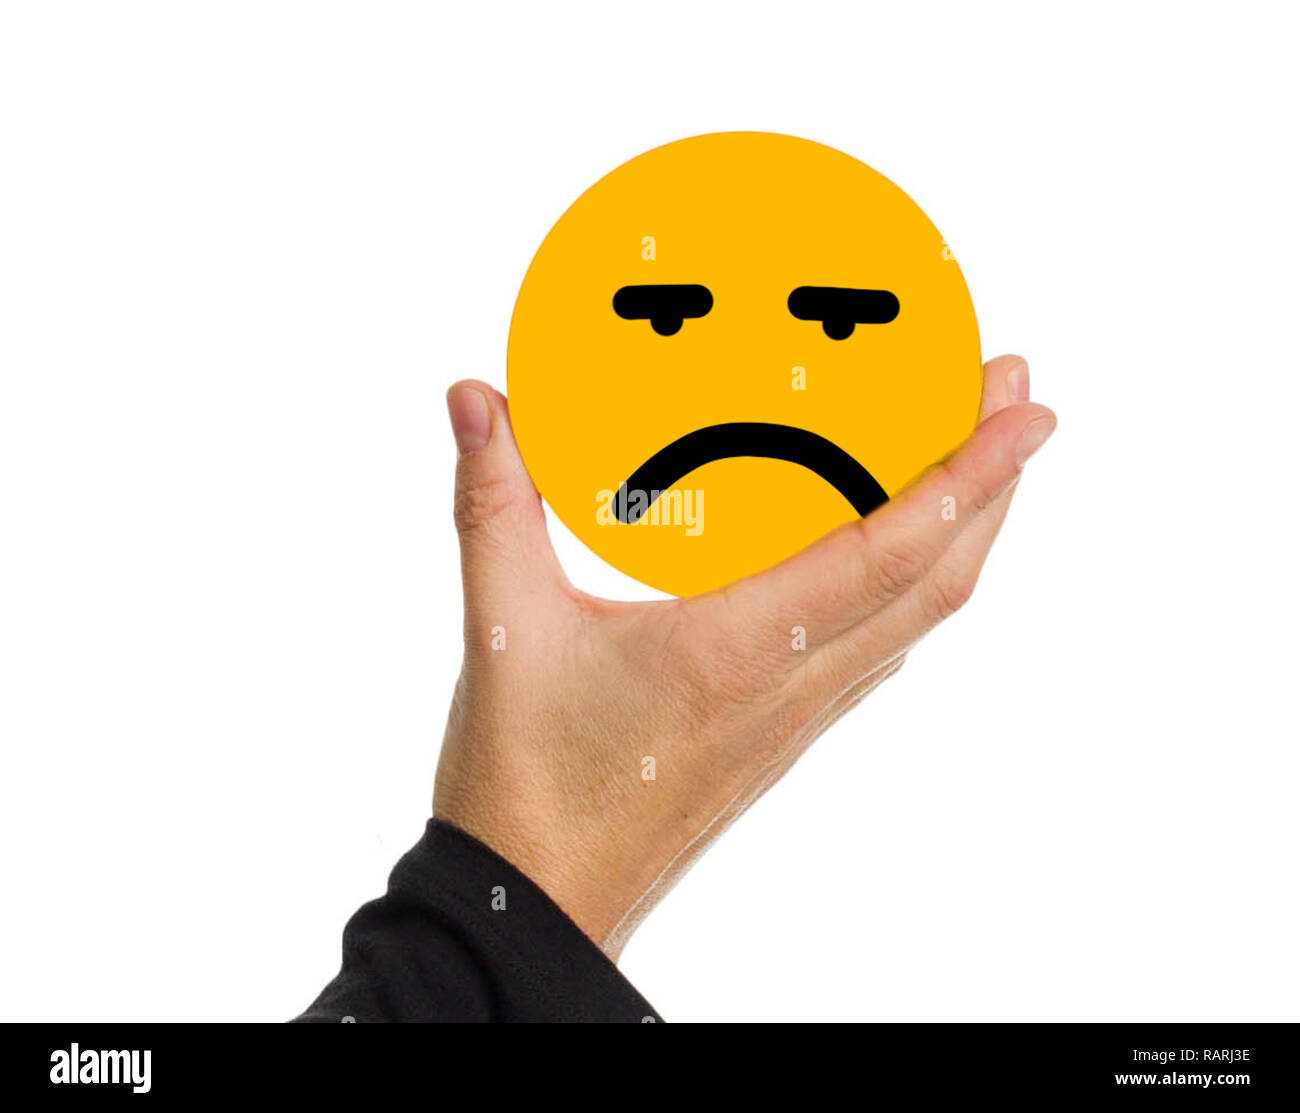 Hand holding a yellow circle with face expression sad illustration. Stock Photo